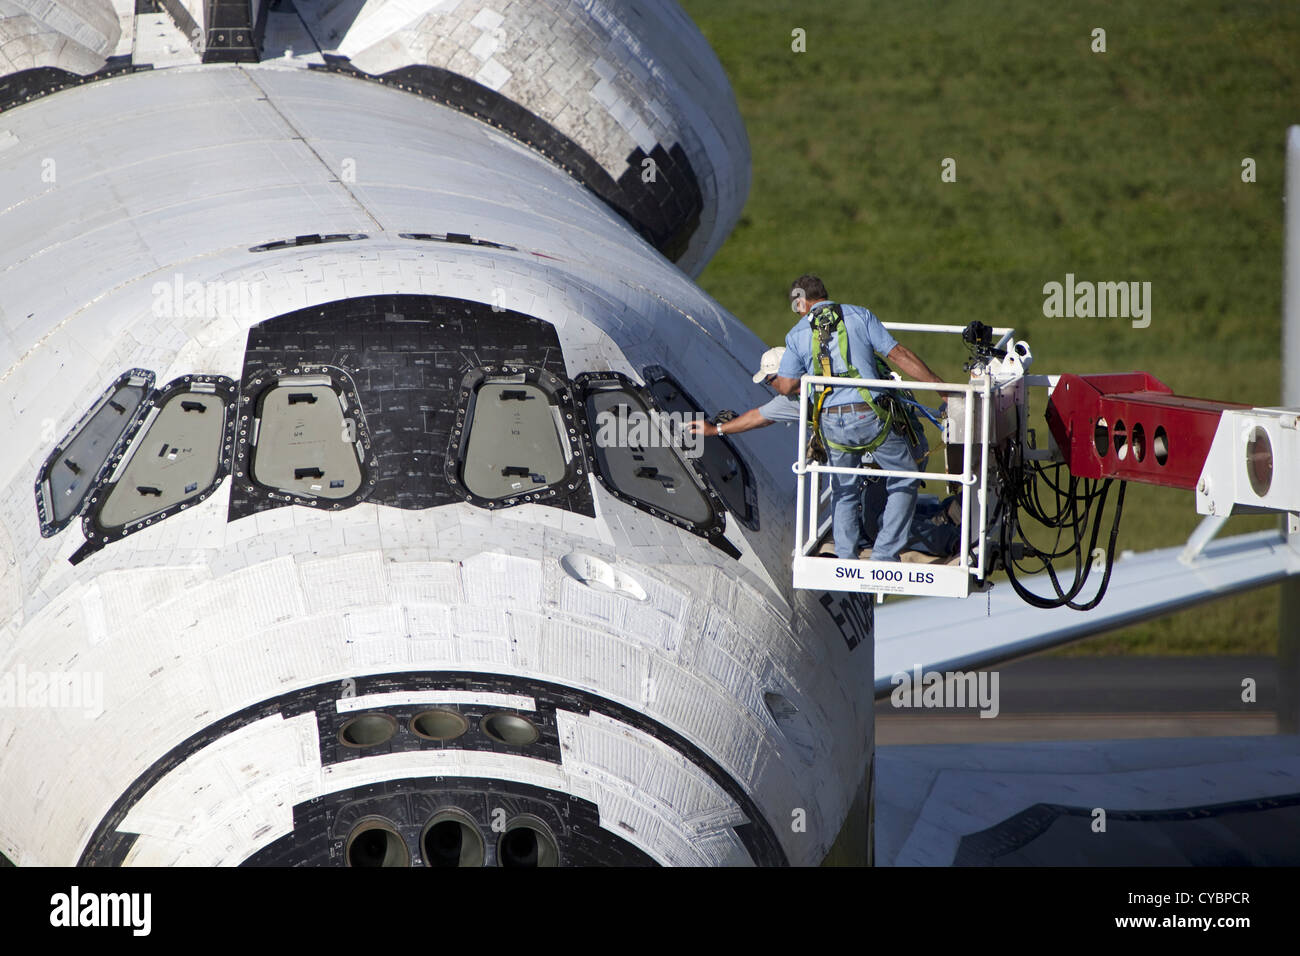 United Space Alliance technicians uncover the cockpit windows on space shuttle Endeavour at the Shuttle Landing Facility at NASA's Kennedy Space Center September 16, 2012 in Florida. Endeavour is balanced and secured atop NASA's Shuttle Carrier Aircraft. The Shuttle Carrier Aircraft is a modified 747 jetliner that will fly Endeavour to Los Angeles where it will be placed on public display at the California Science Center. Stock Photo